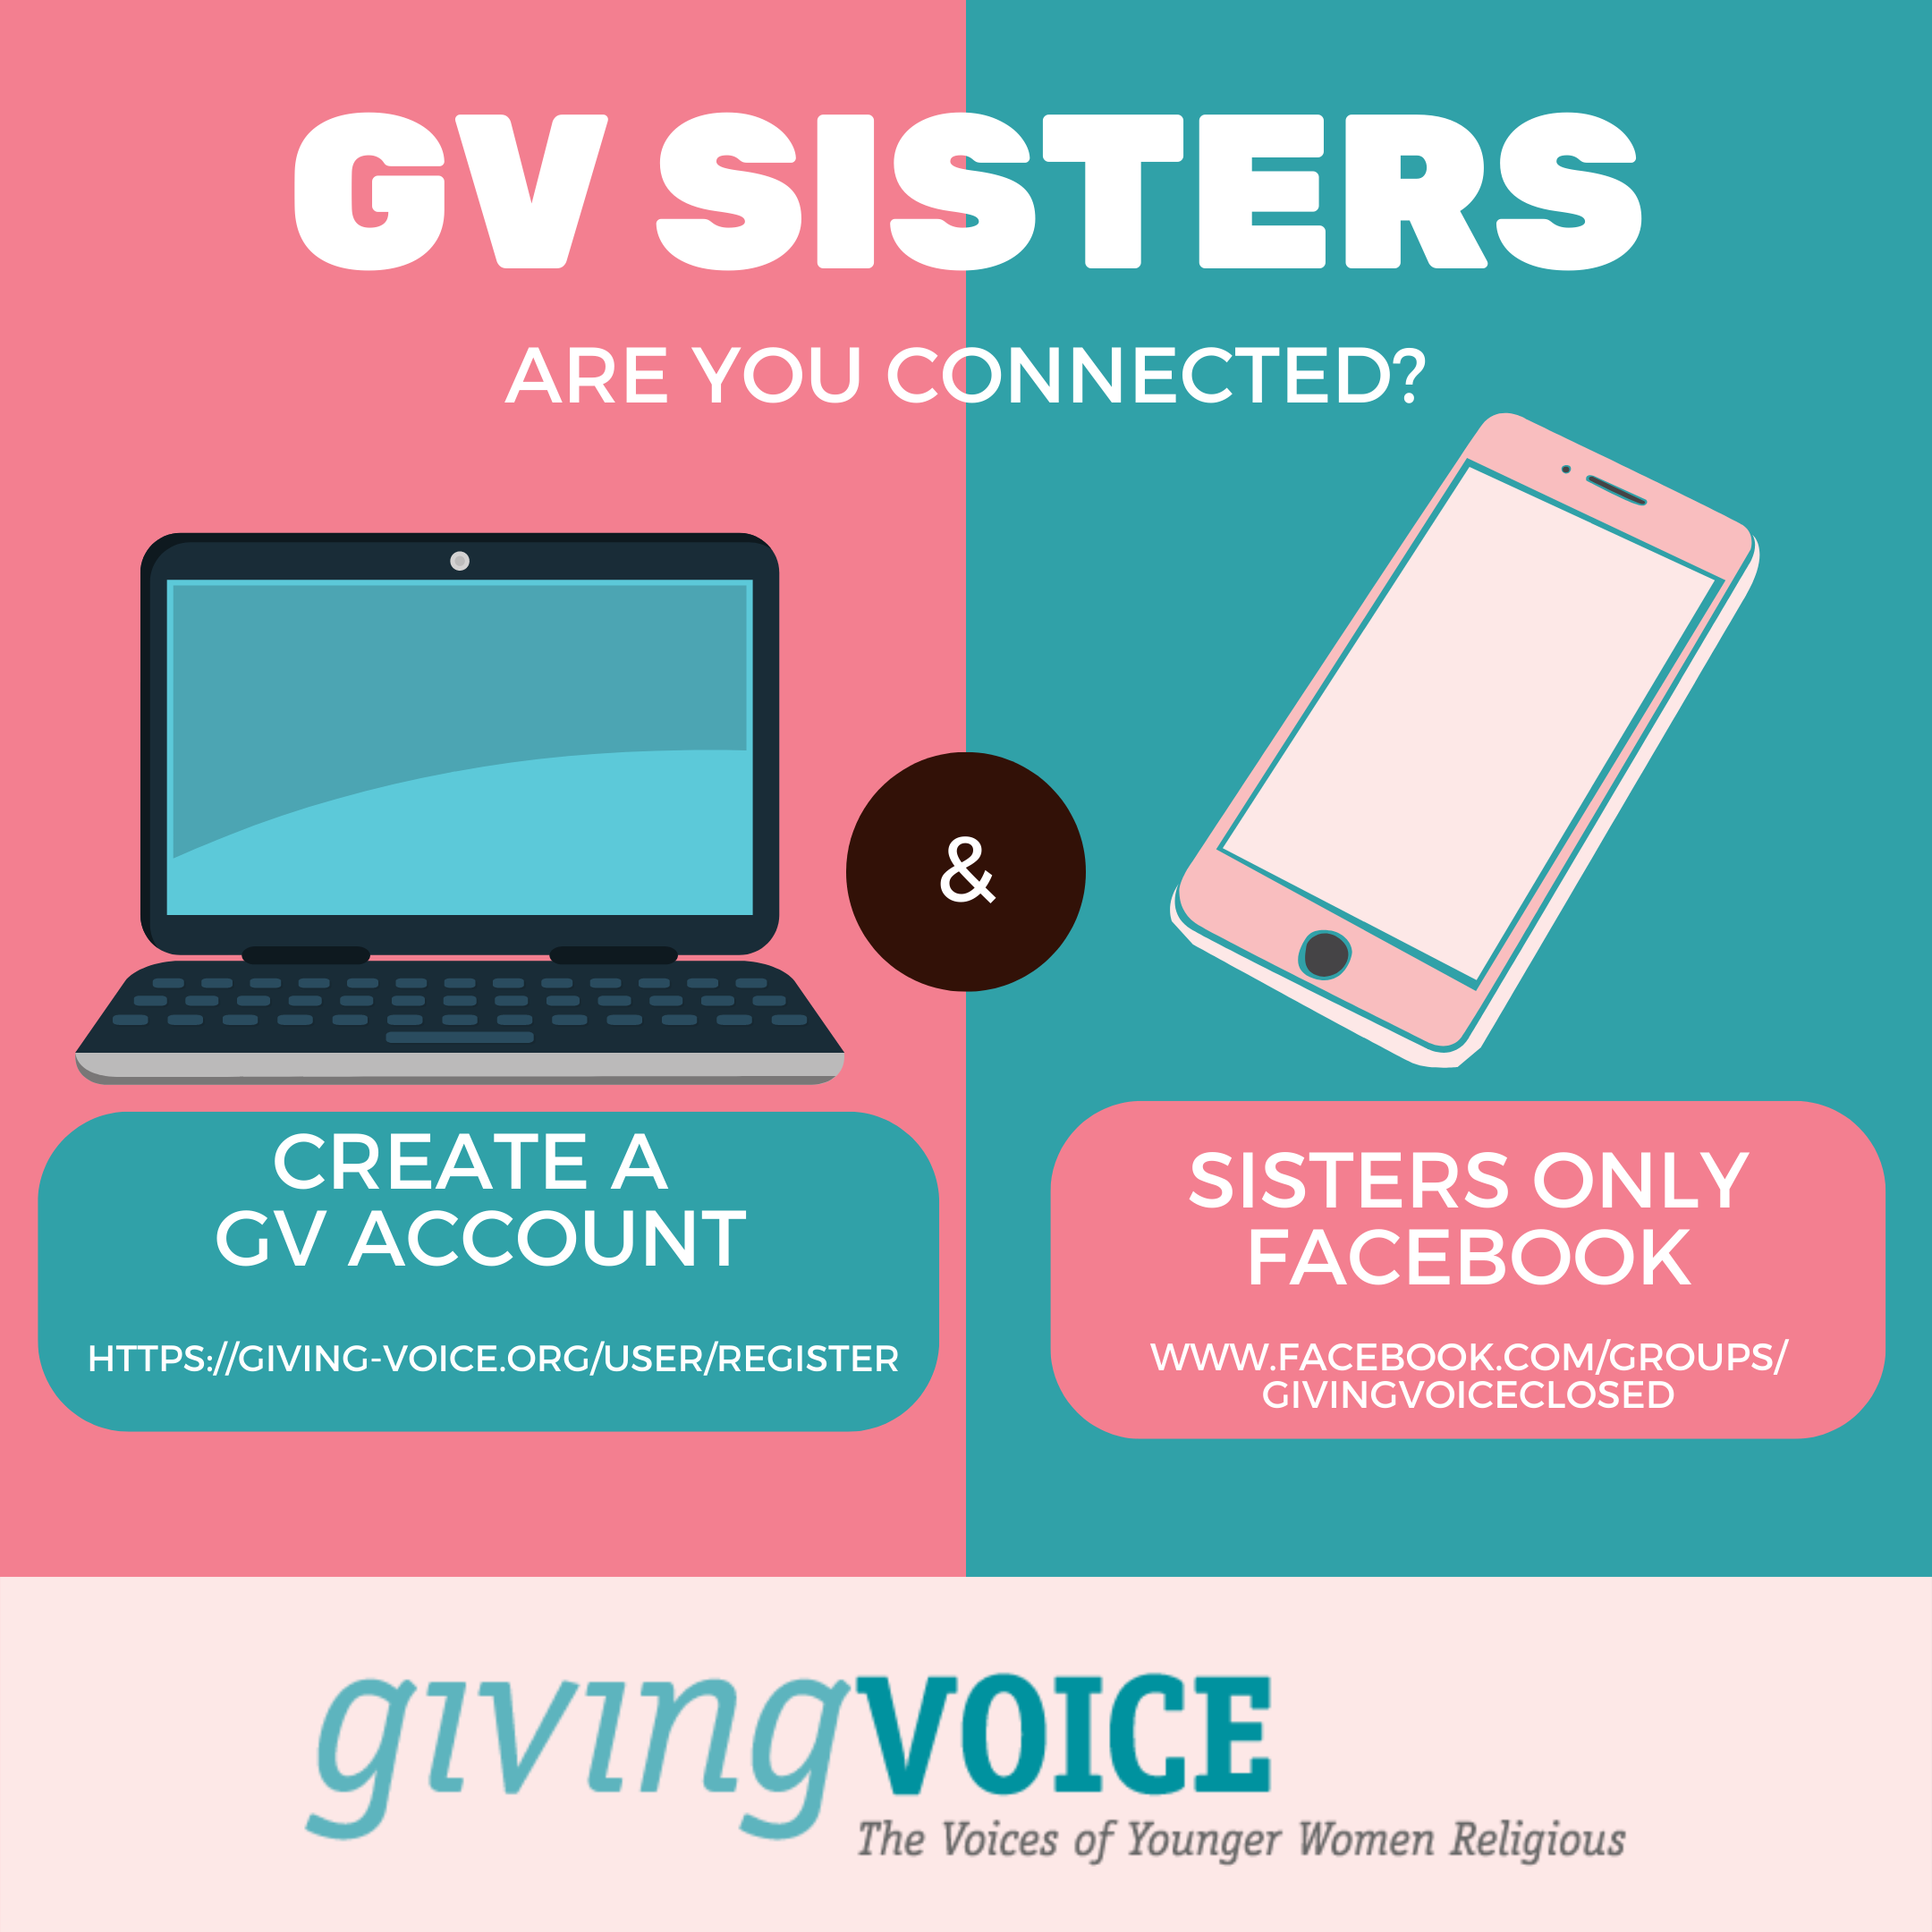 GV sisters- stay connected